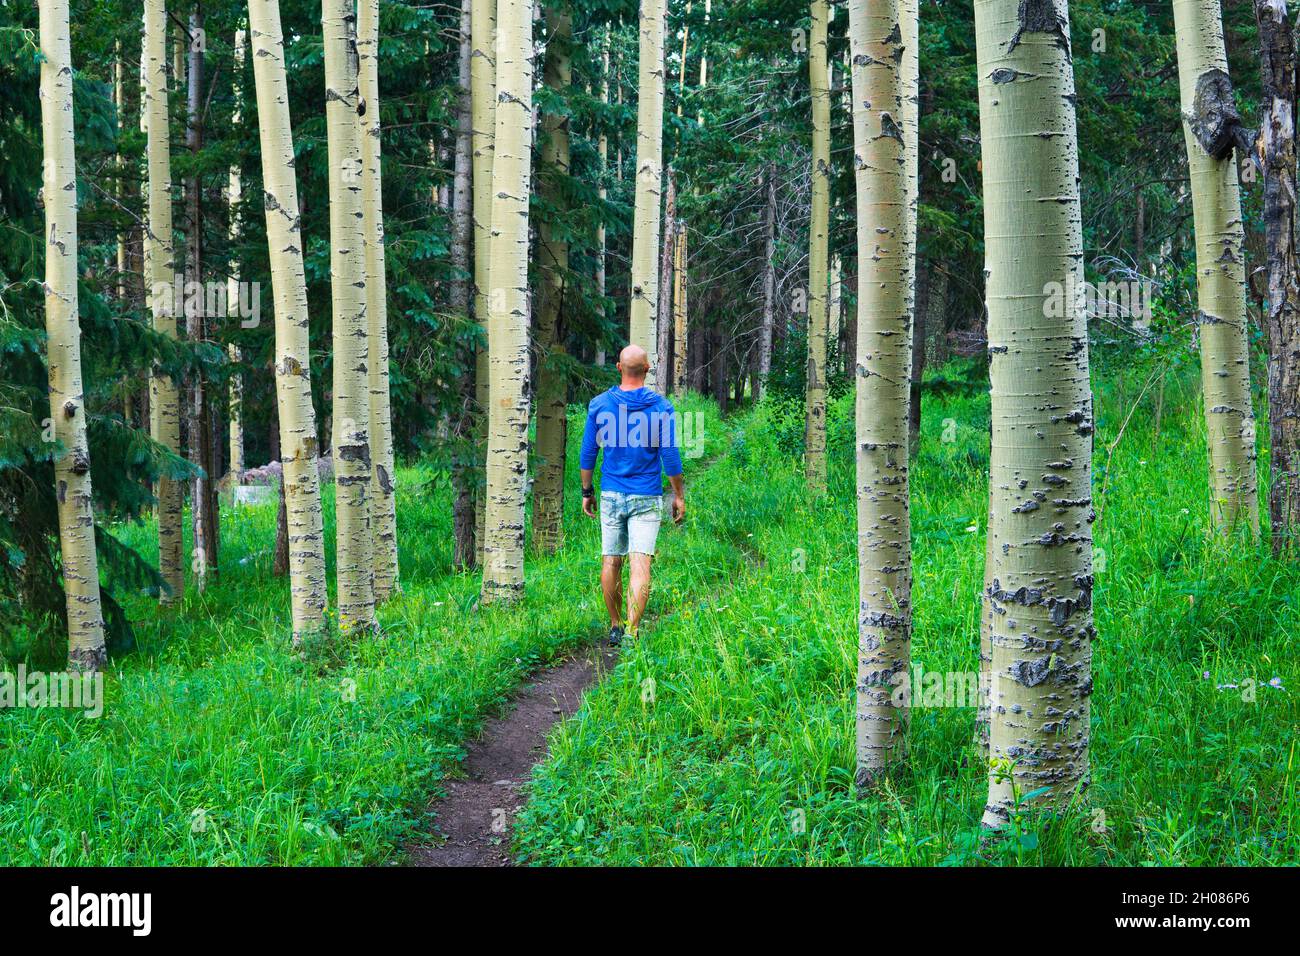 Man On Path In Aspen Forest Stock Photo